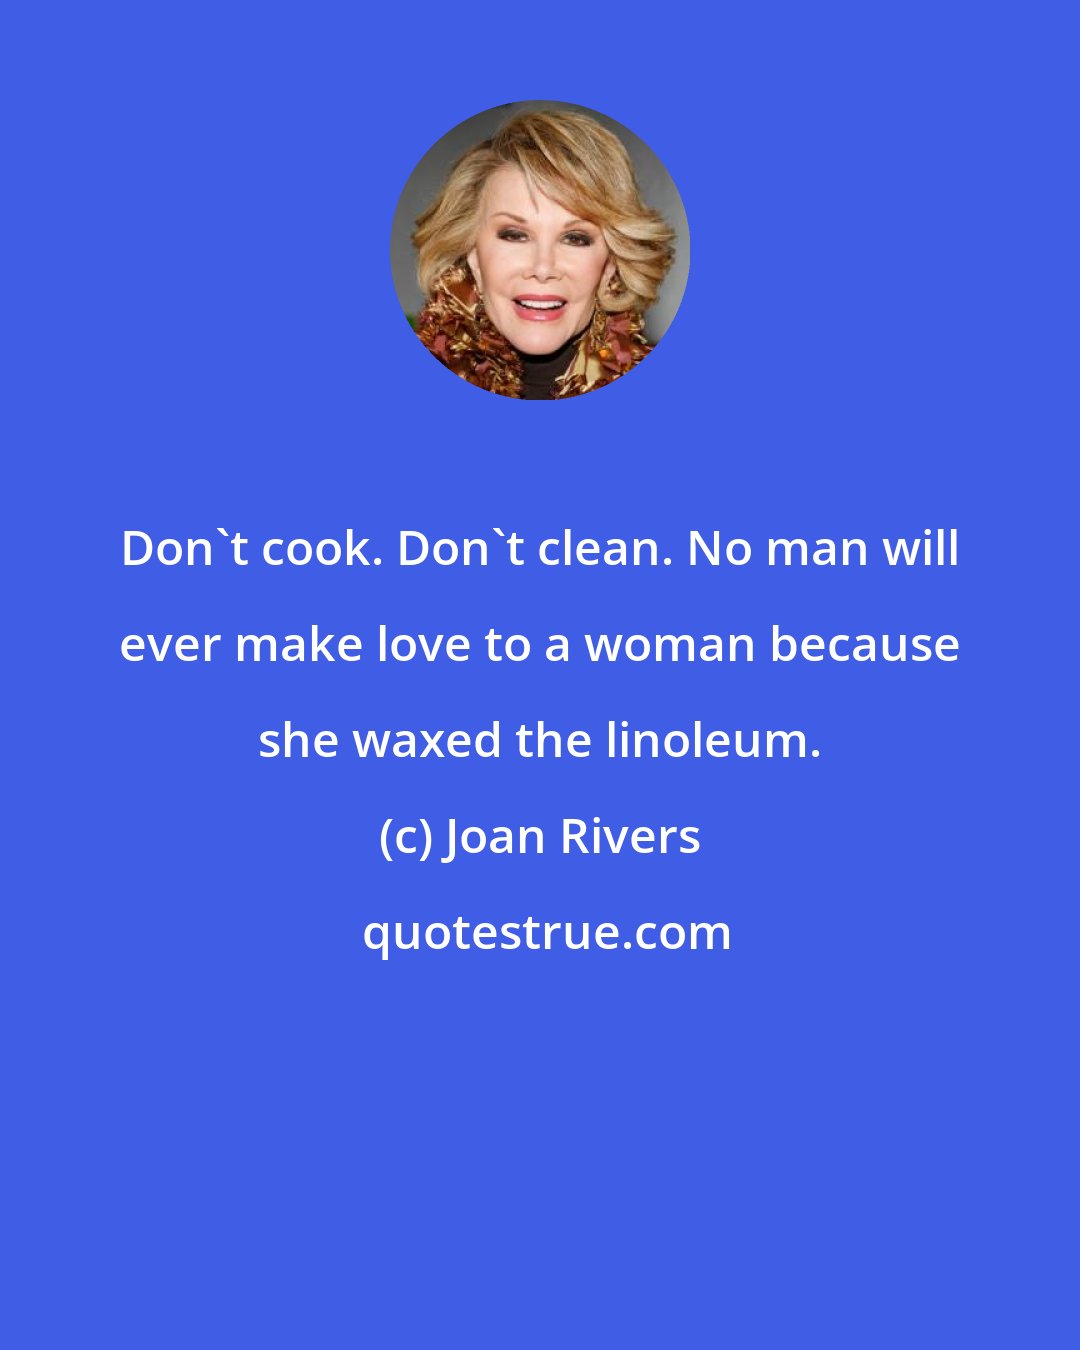 Joan Rivers: Don't cook. Don't clean. No man will ever make love to a woman because she waxed the linoleum.